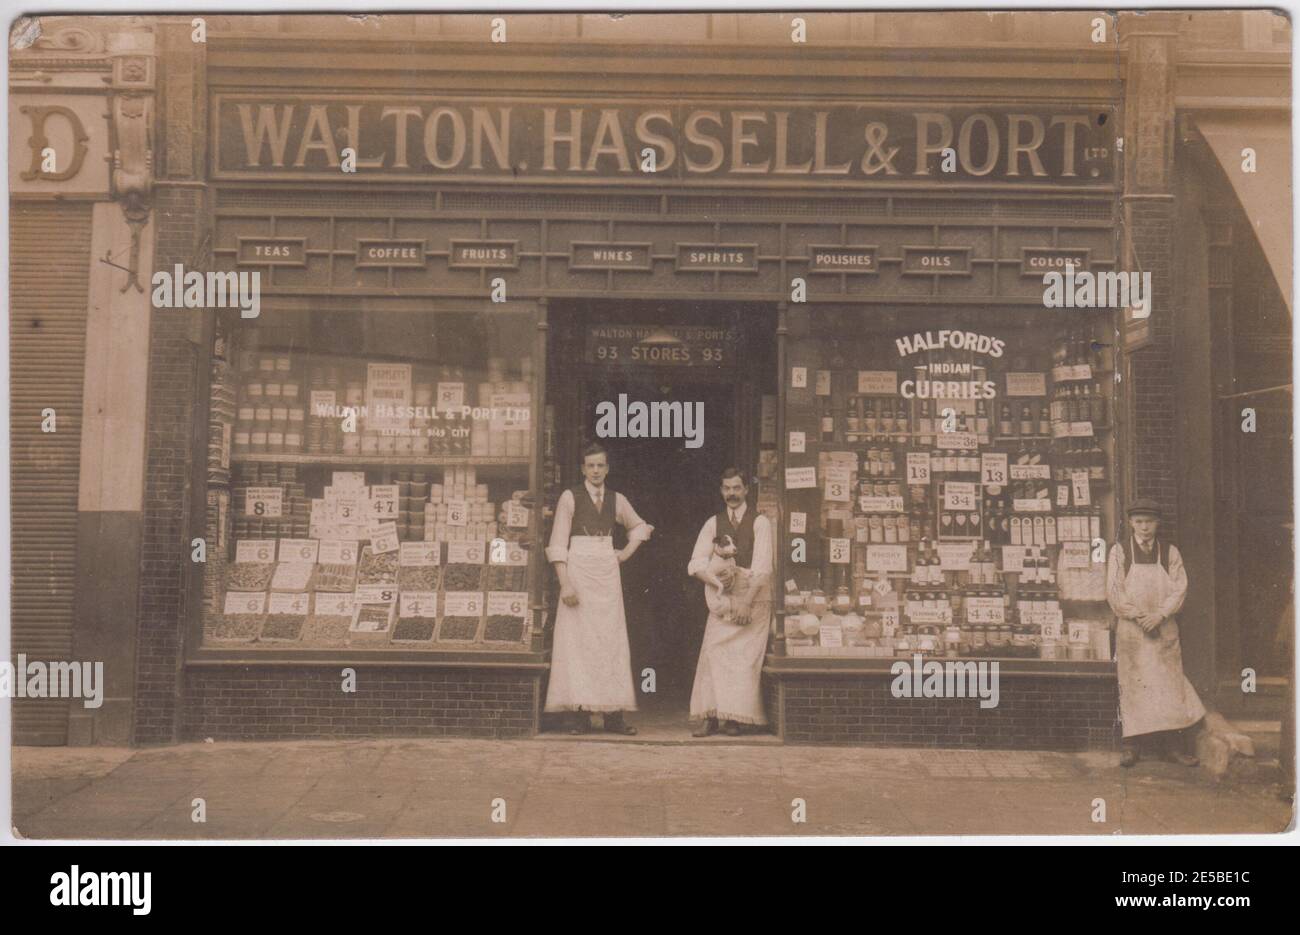 Shop of the London grocer Walton, Hassell and Port Ltd. Three of the employees are standing outside the grocers, one holding a dog. Tins and jars are on display in the windows and Halford Indian curries are among the products advertised Stock Photo